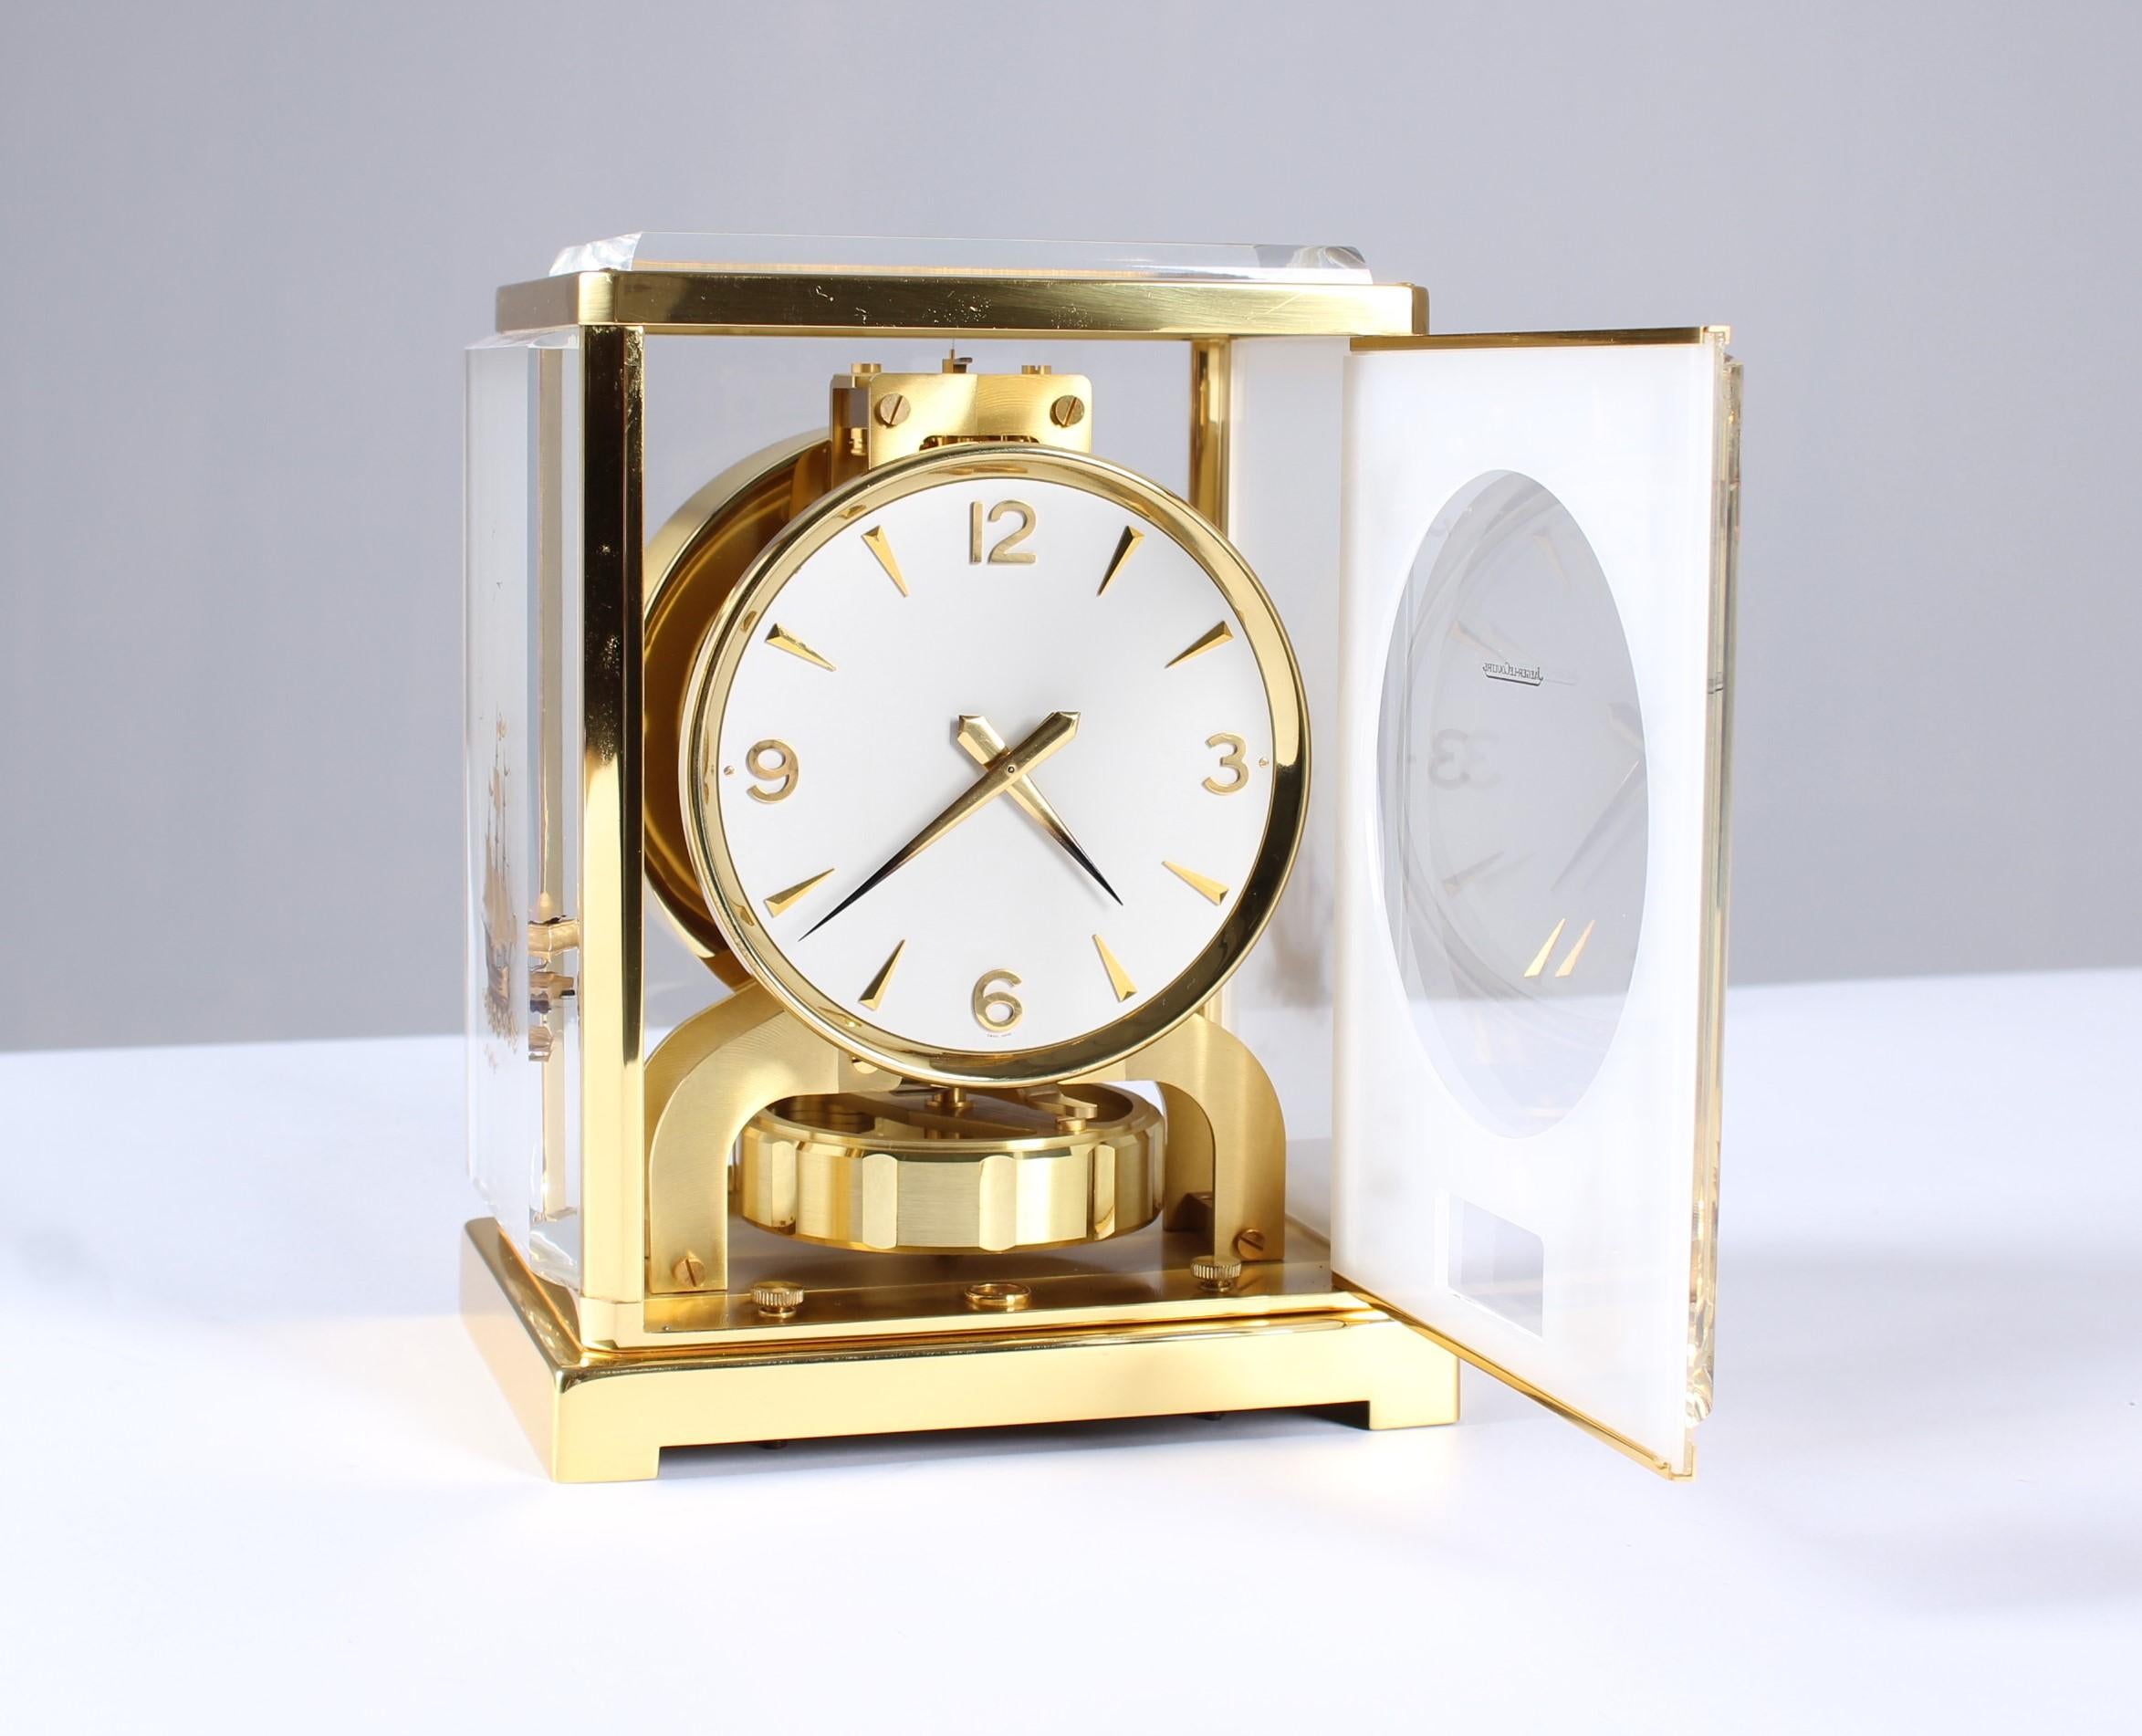 Switzerland
Brass, plexiglass
Year of manufacture 1964

Dimensions: H x W x D: 22.5 x 18 x 13.5 cm

Description:
The Atmos V caliber 526 is produced in various special models. The model 